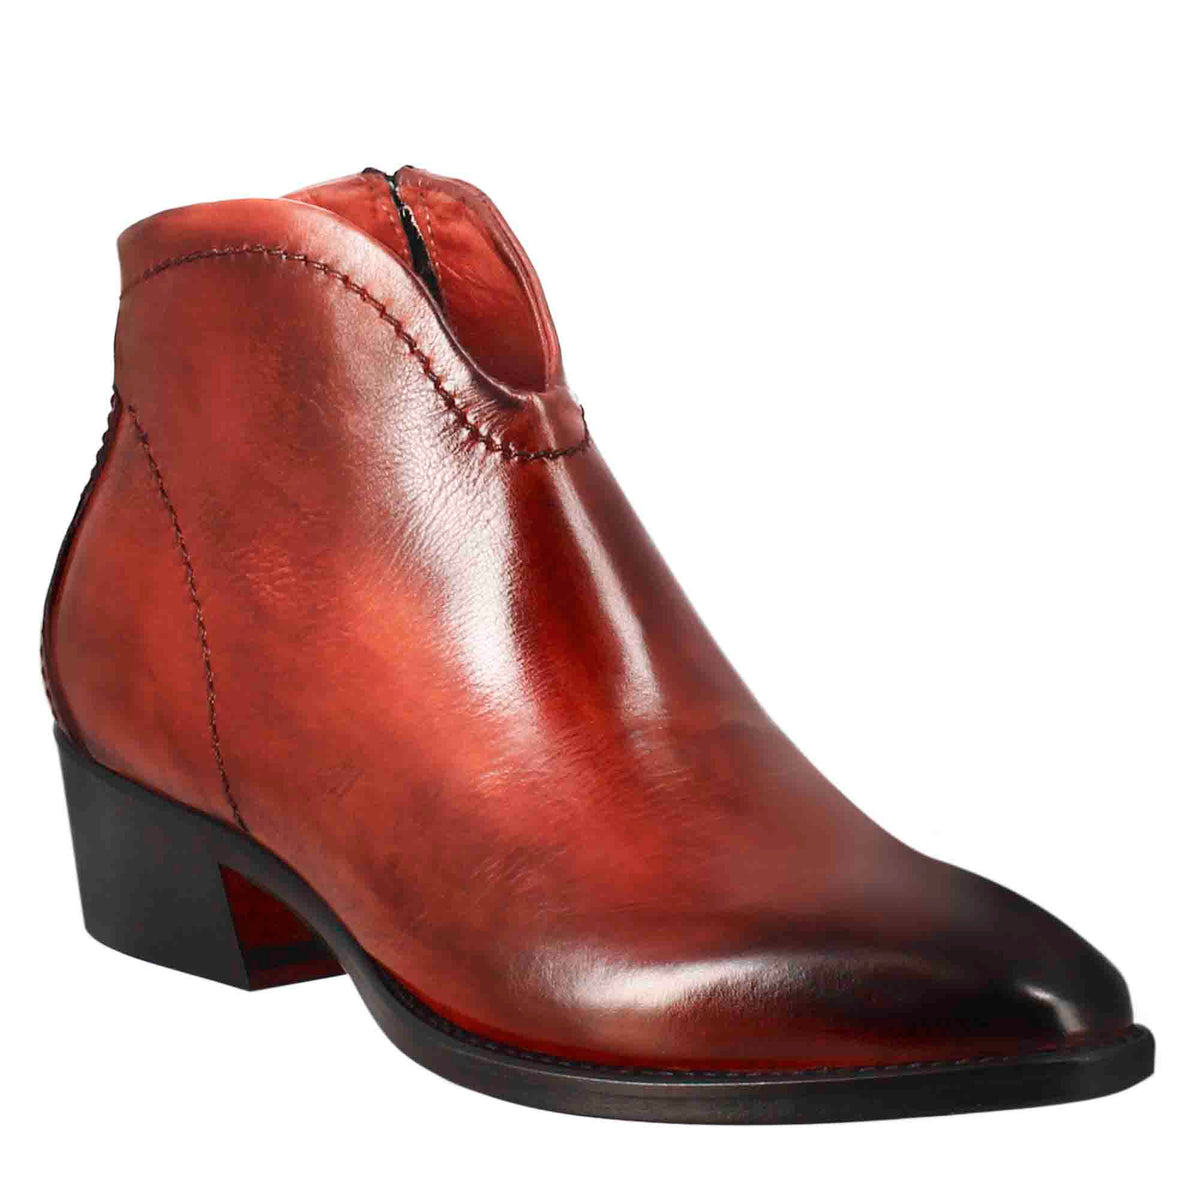 Smooth women's ankle boot with medium heel in red leather